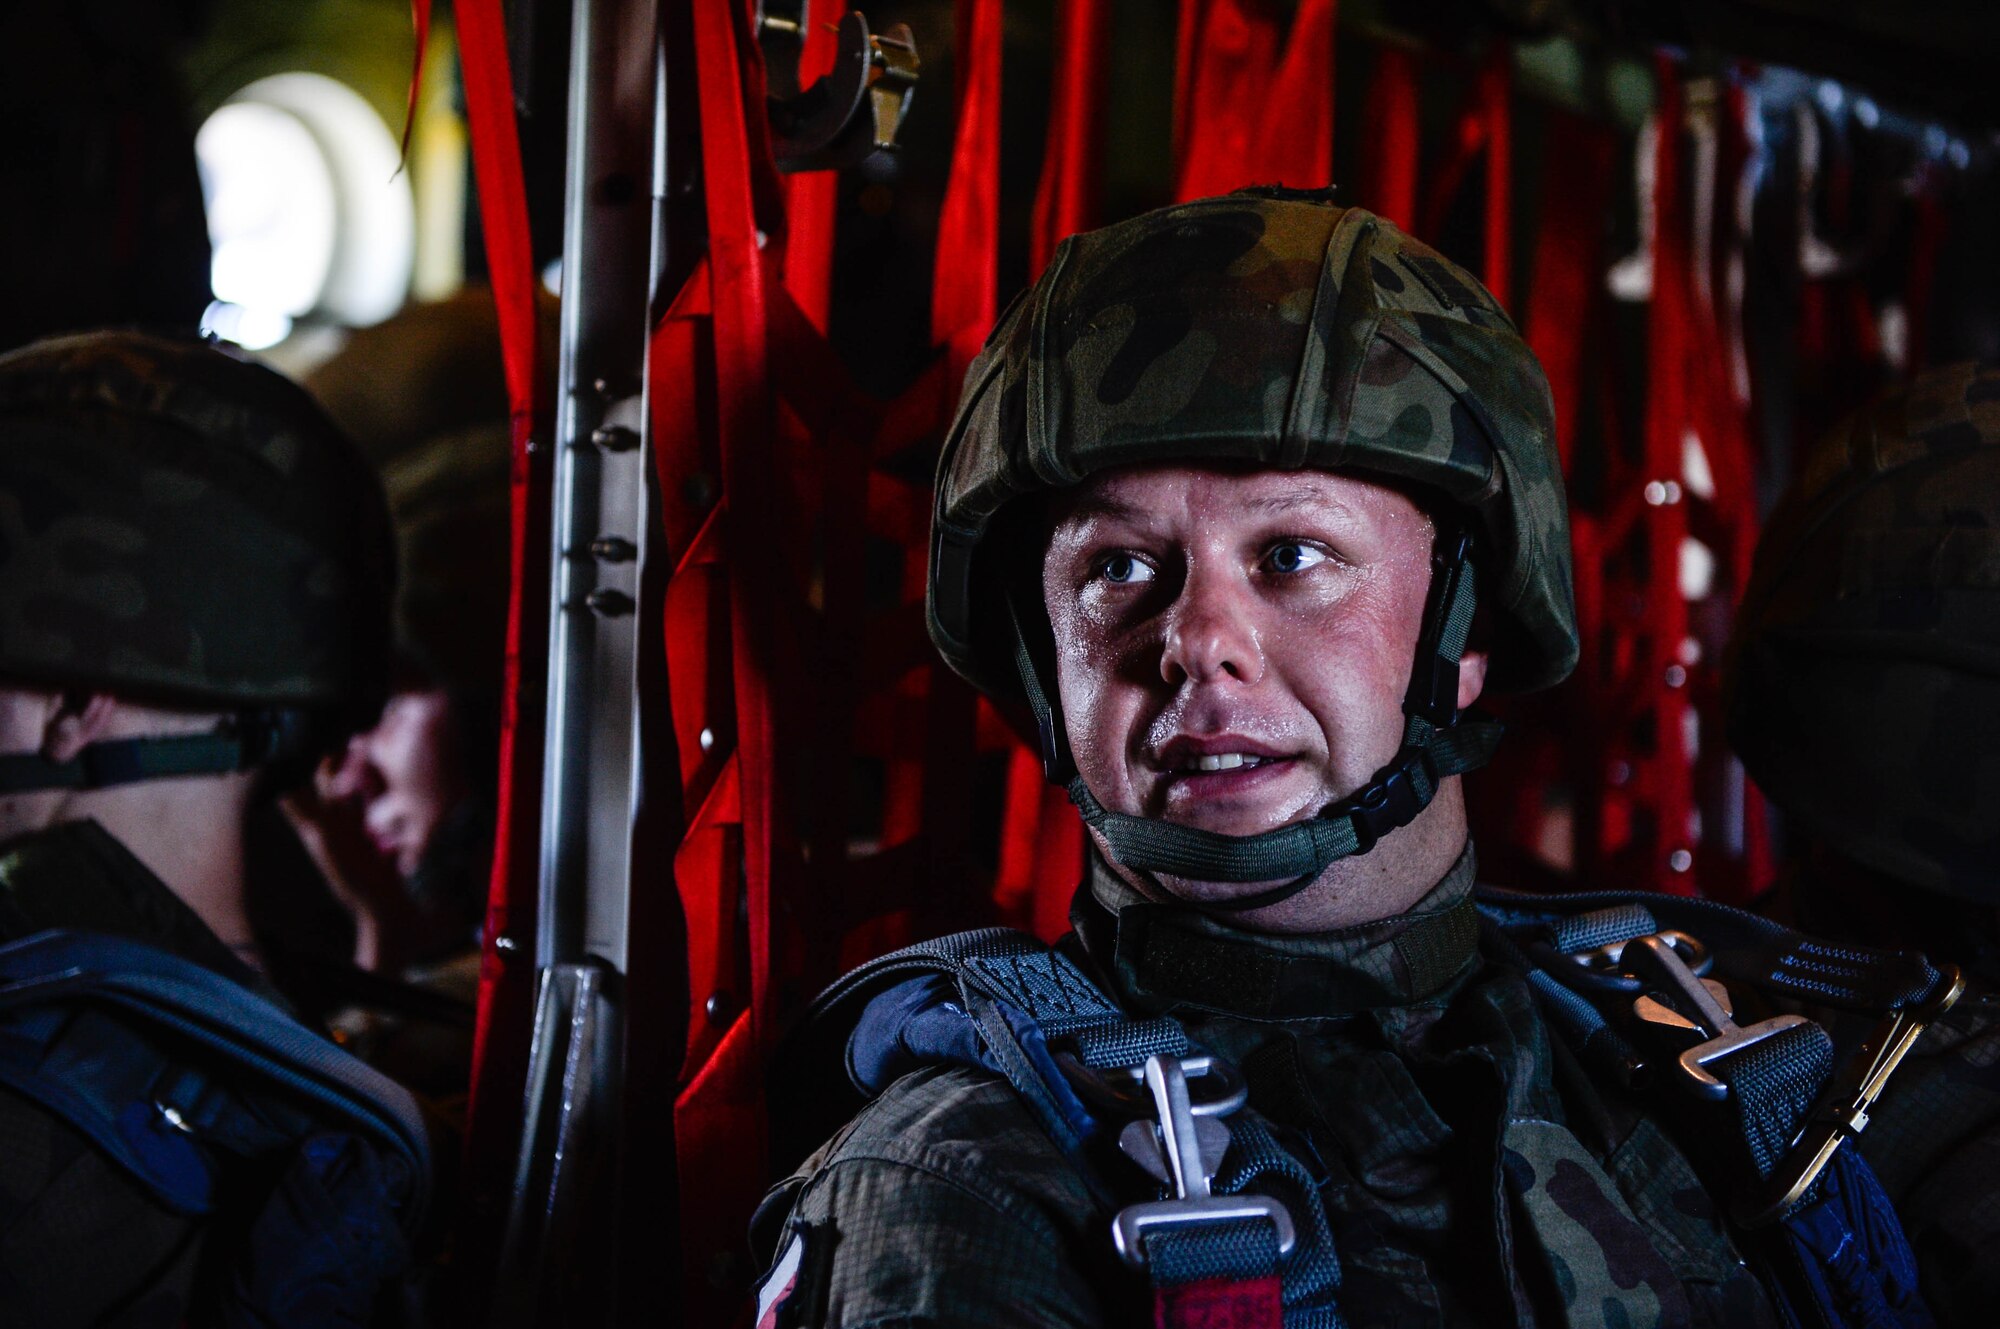 A Polish paratrooper sits down after boarding a U.S. Air Force C-130J Super Hercules at Krakow, Poland, Aug. 7, 2018. Approximately 100 Polish paratroopers jumped from two U.S. aircraft during Aviation Rotation 18-4, an annual bilateral exercise between the U.S. and Polish militaries. (U.S. Air Force photo by Senior Airman Joshua Magbanua)